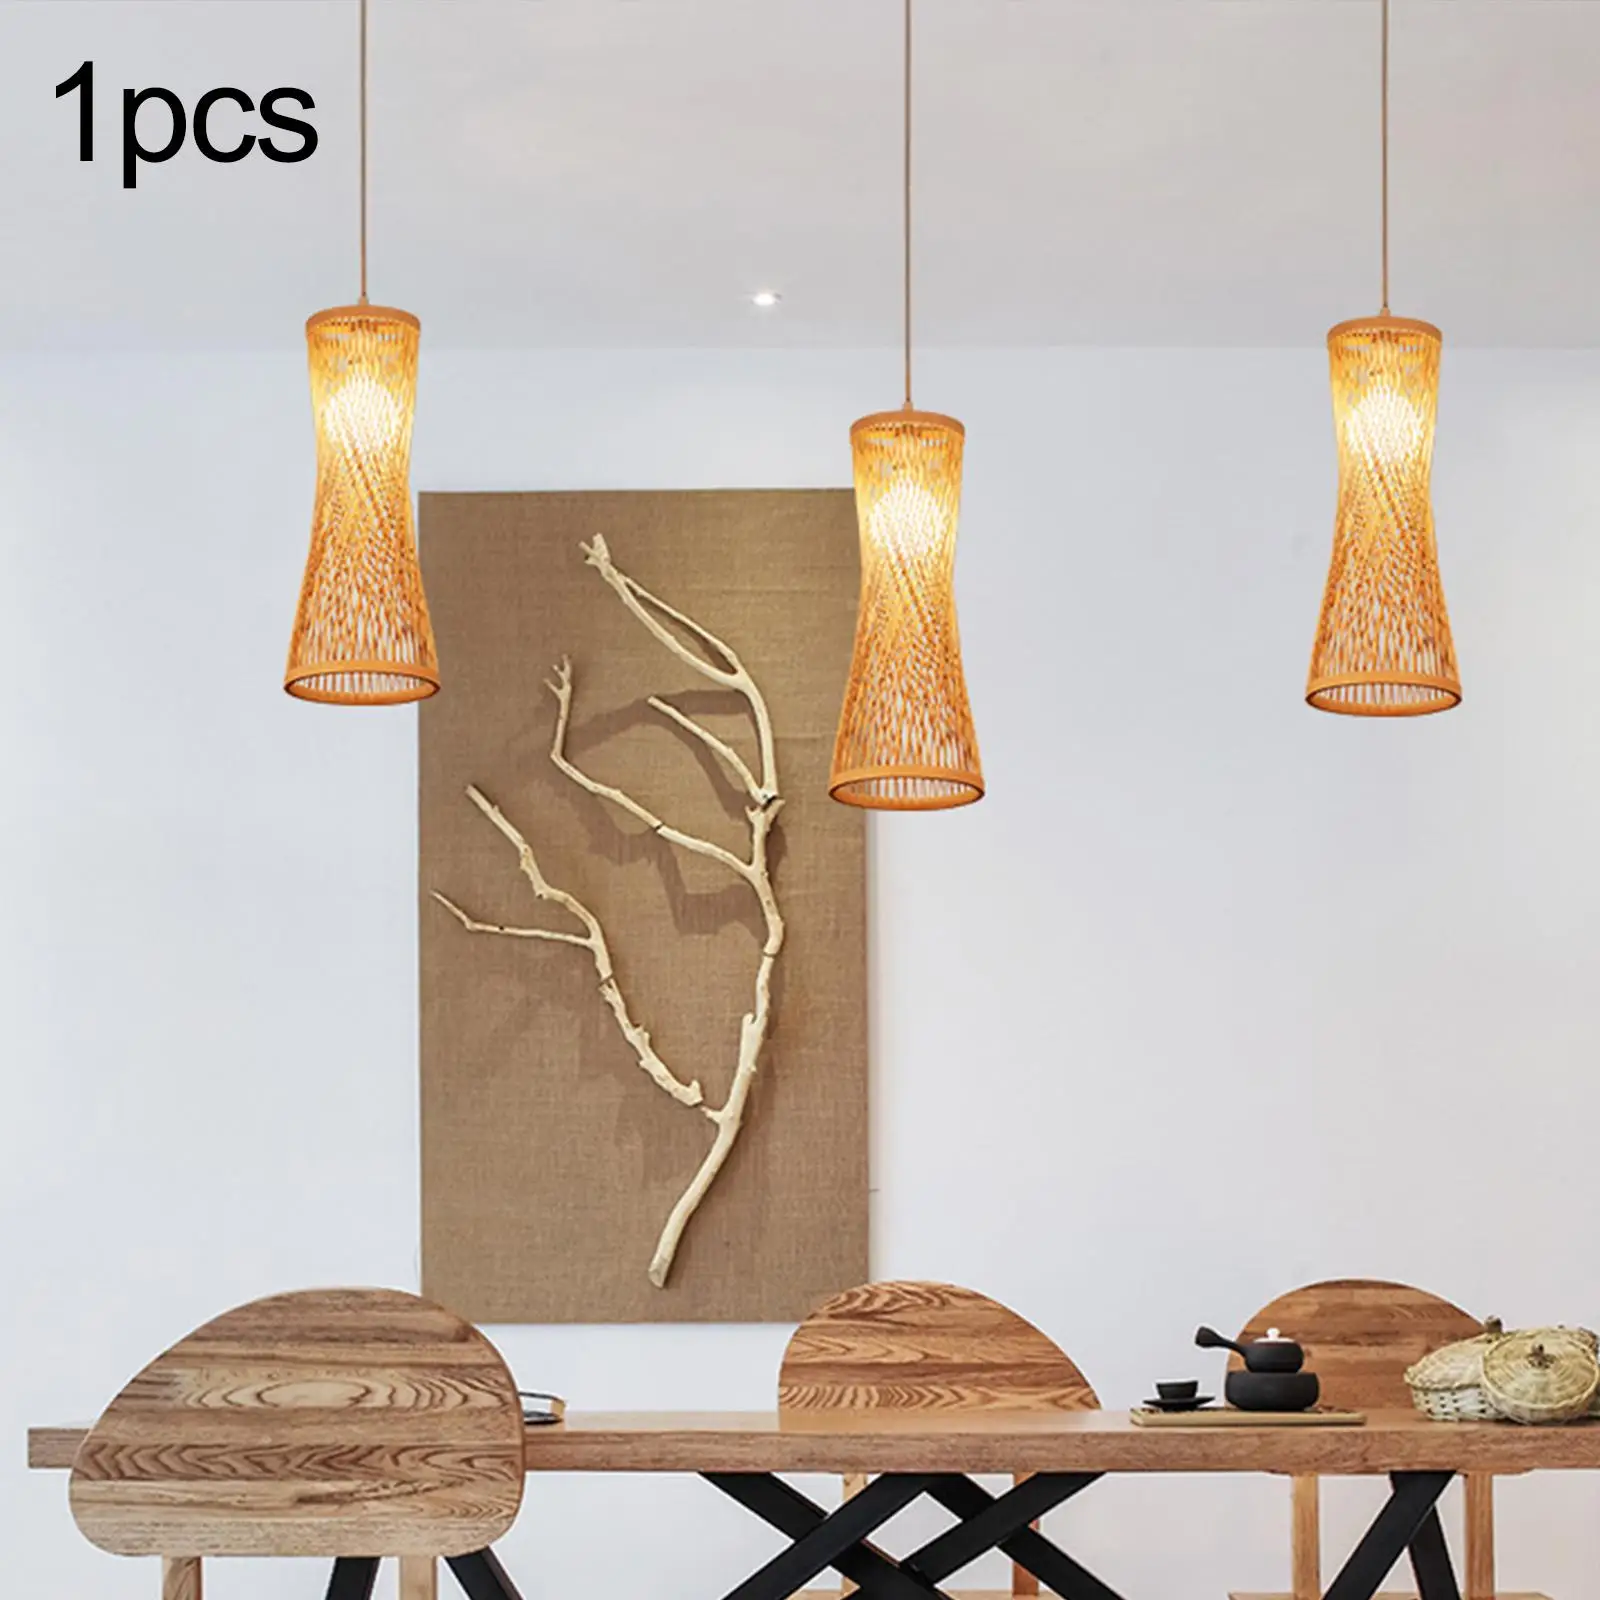 Bamboo Woven Lampshade Creative Handmade Light Fixture Cover Pendant Light Shade for Coffee Shop Living Room Office Home Kitchen